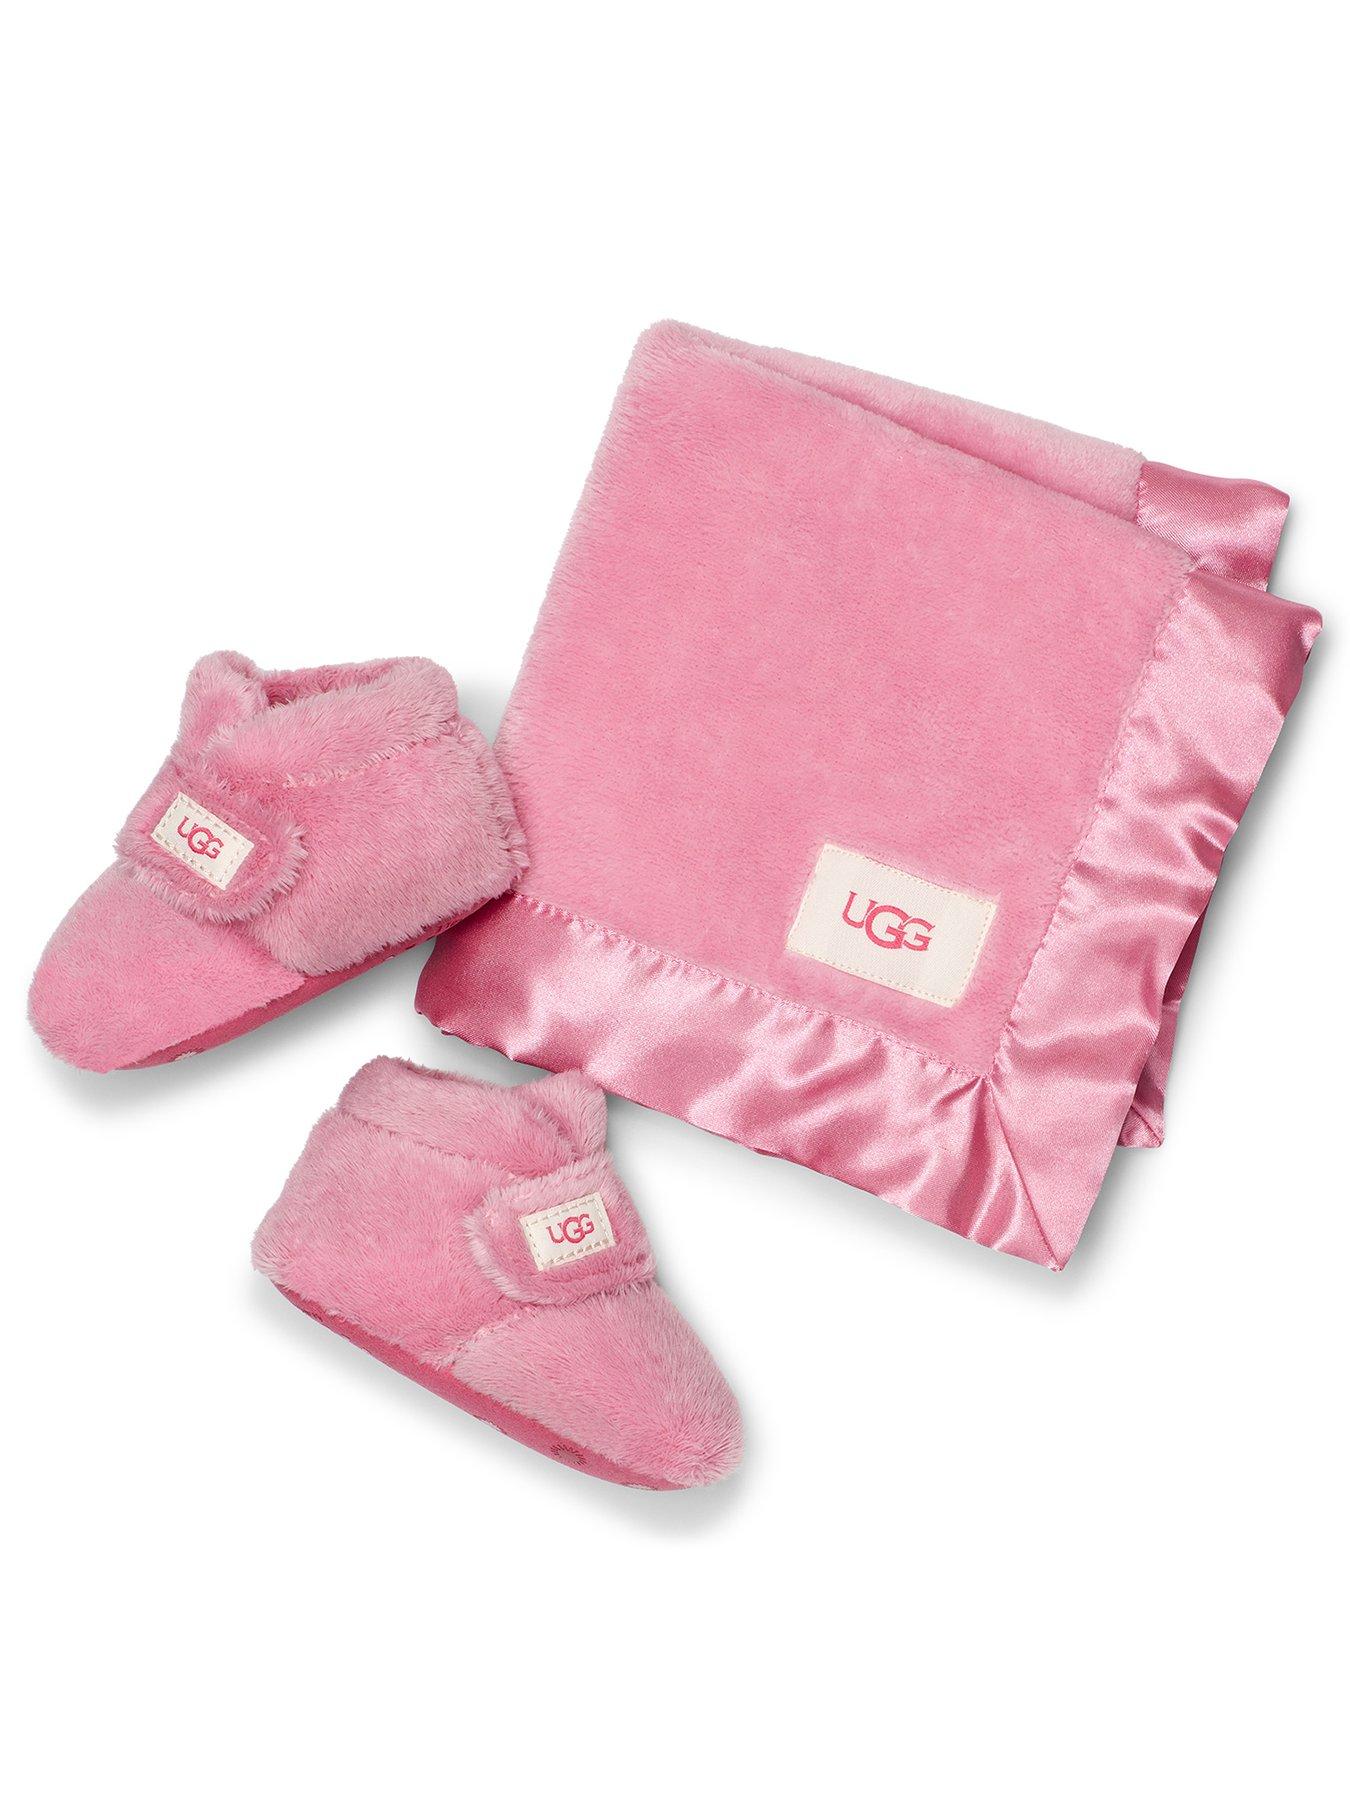 & | | clothes Pink baby Gifts | Baby Child | Very Ireland